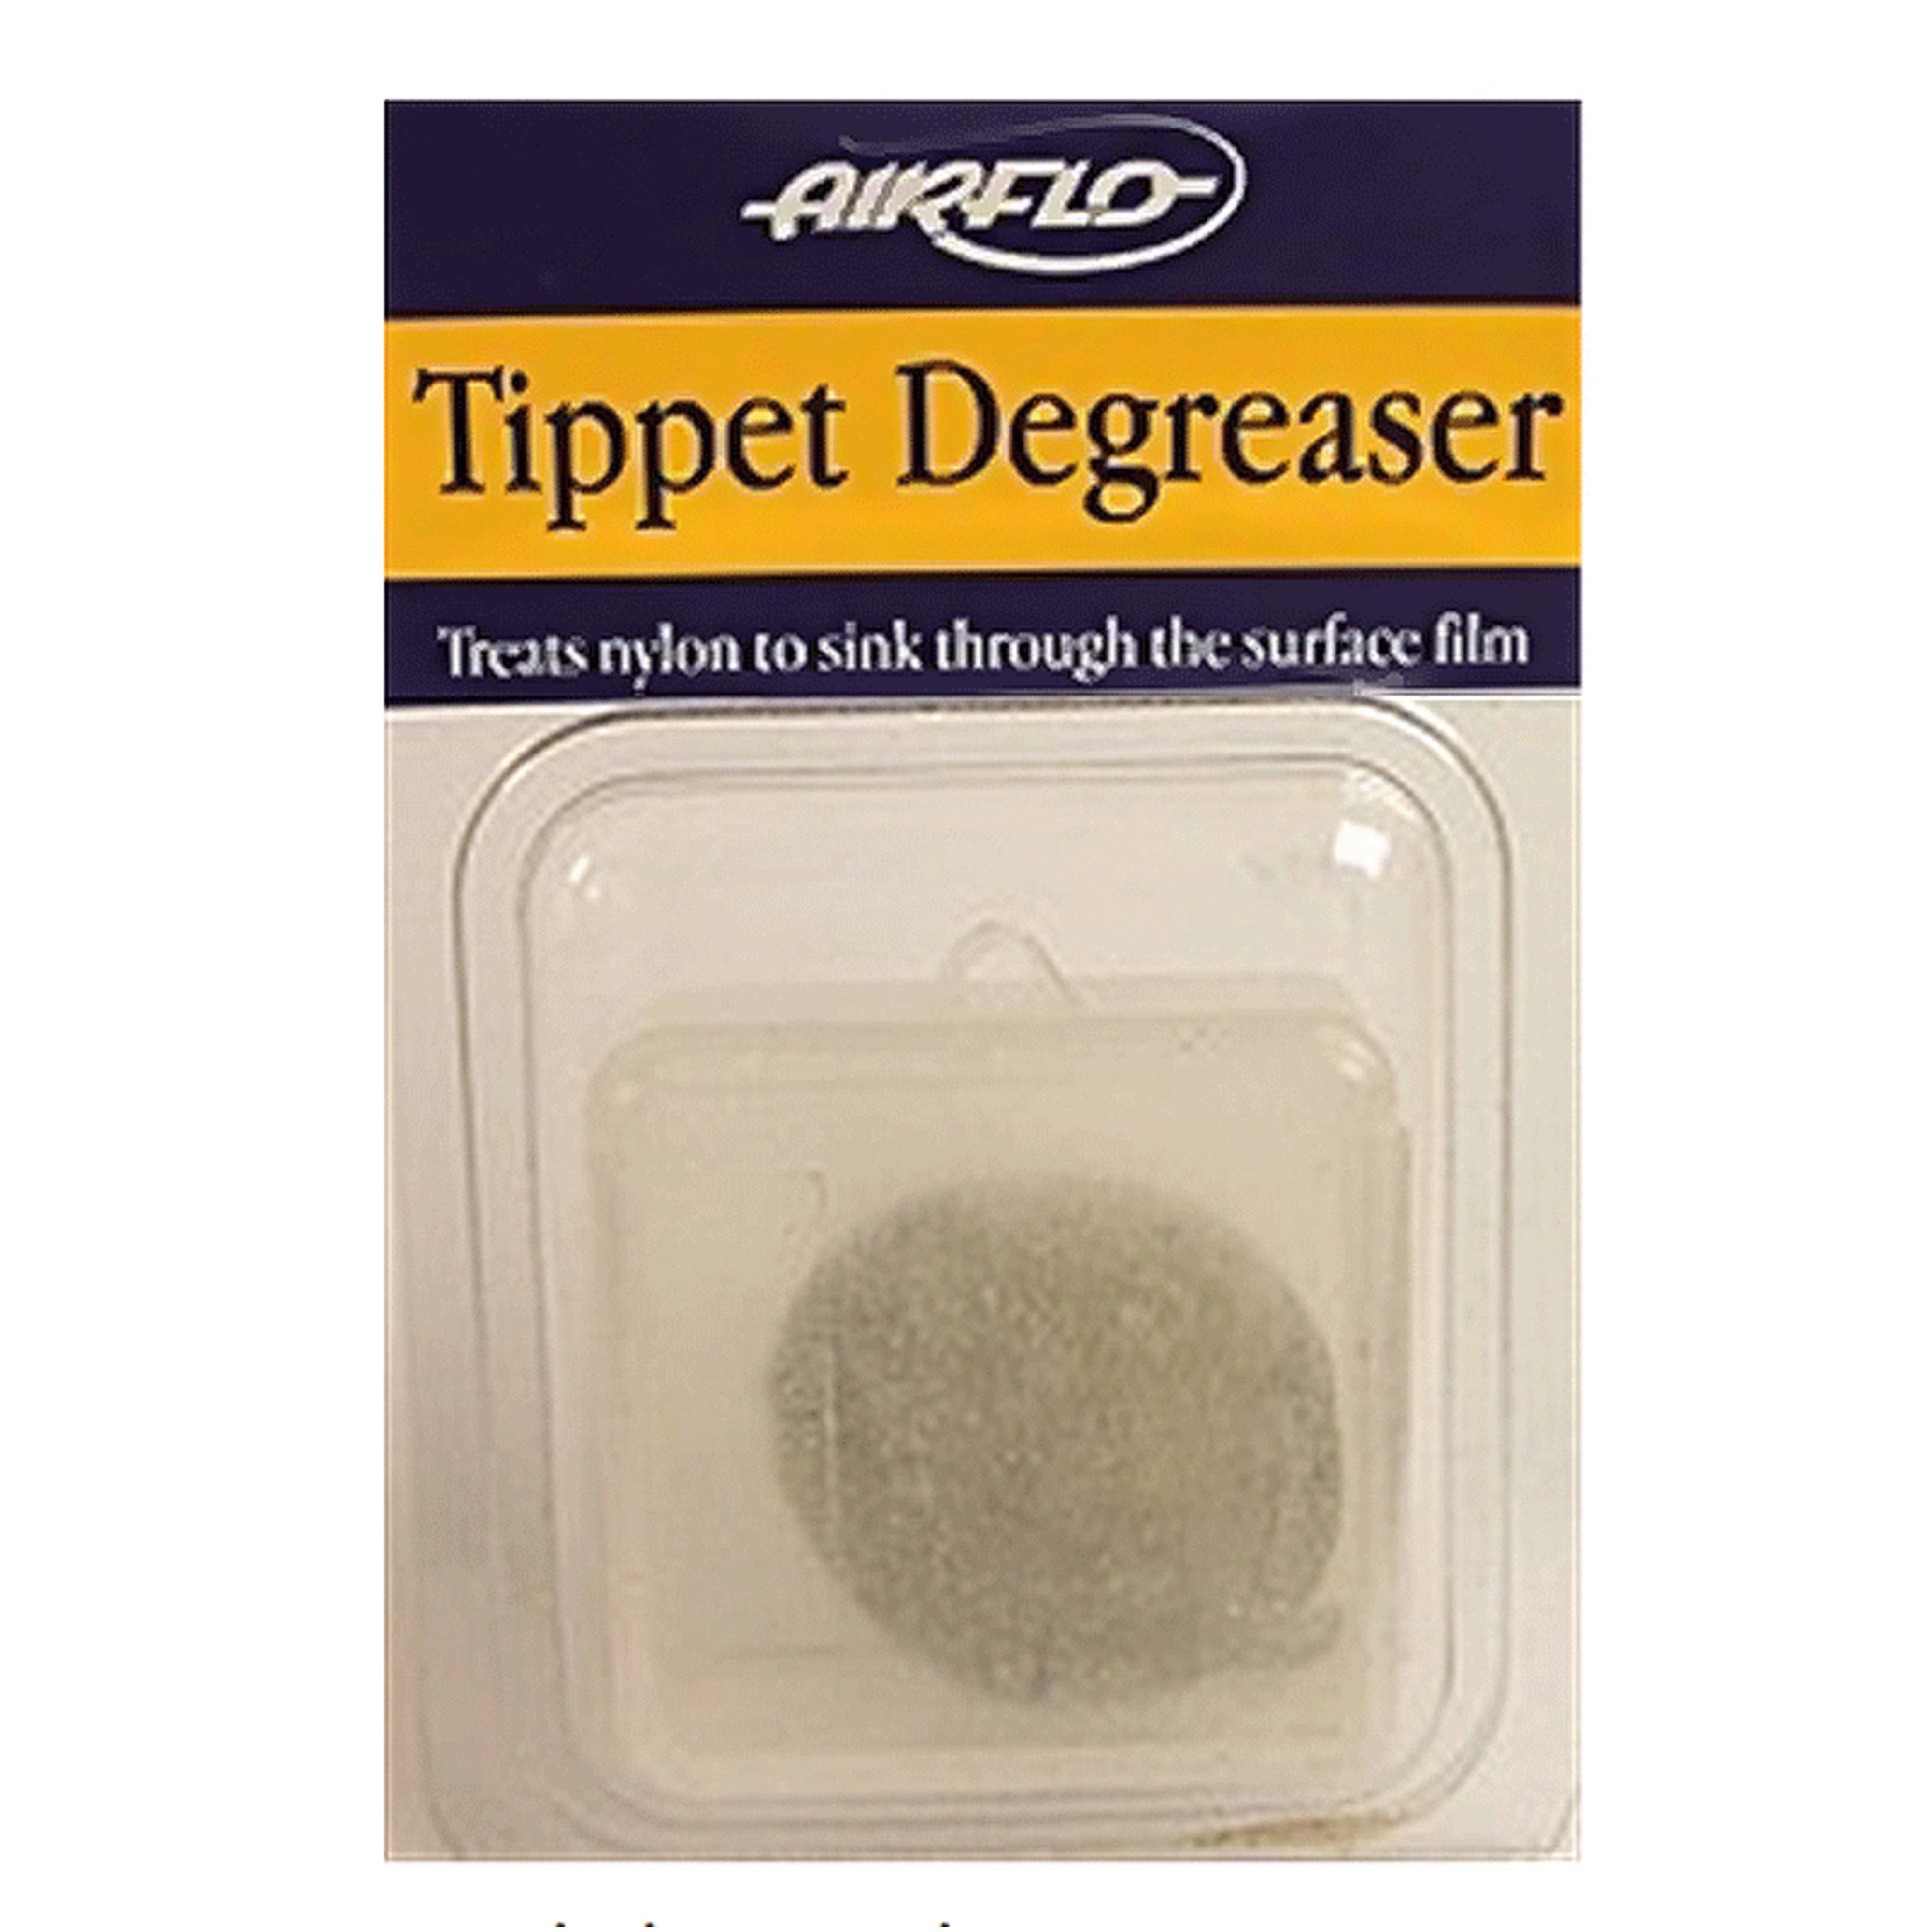 BVG Tippet Degreaser Review